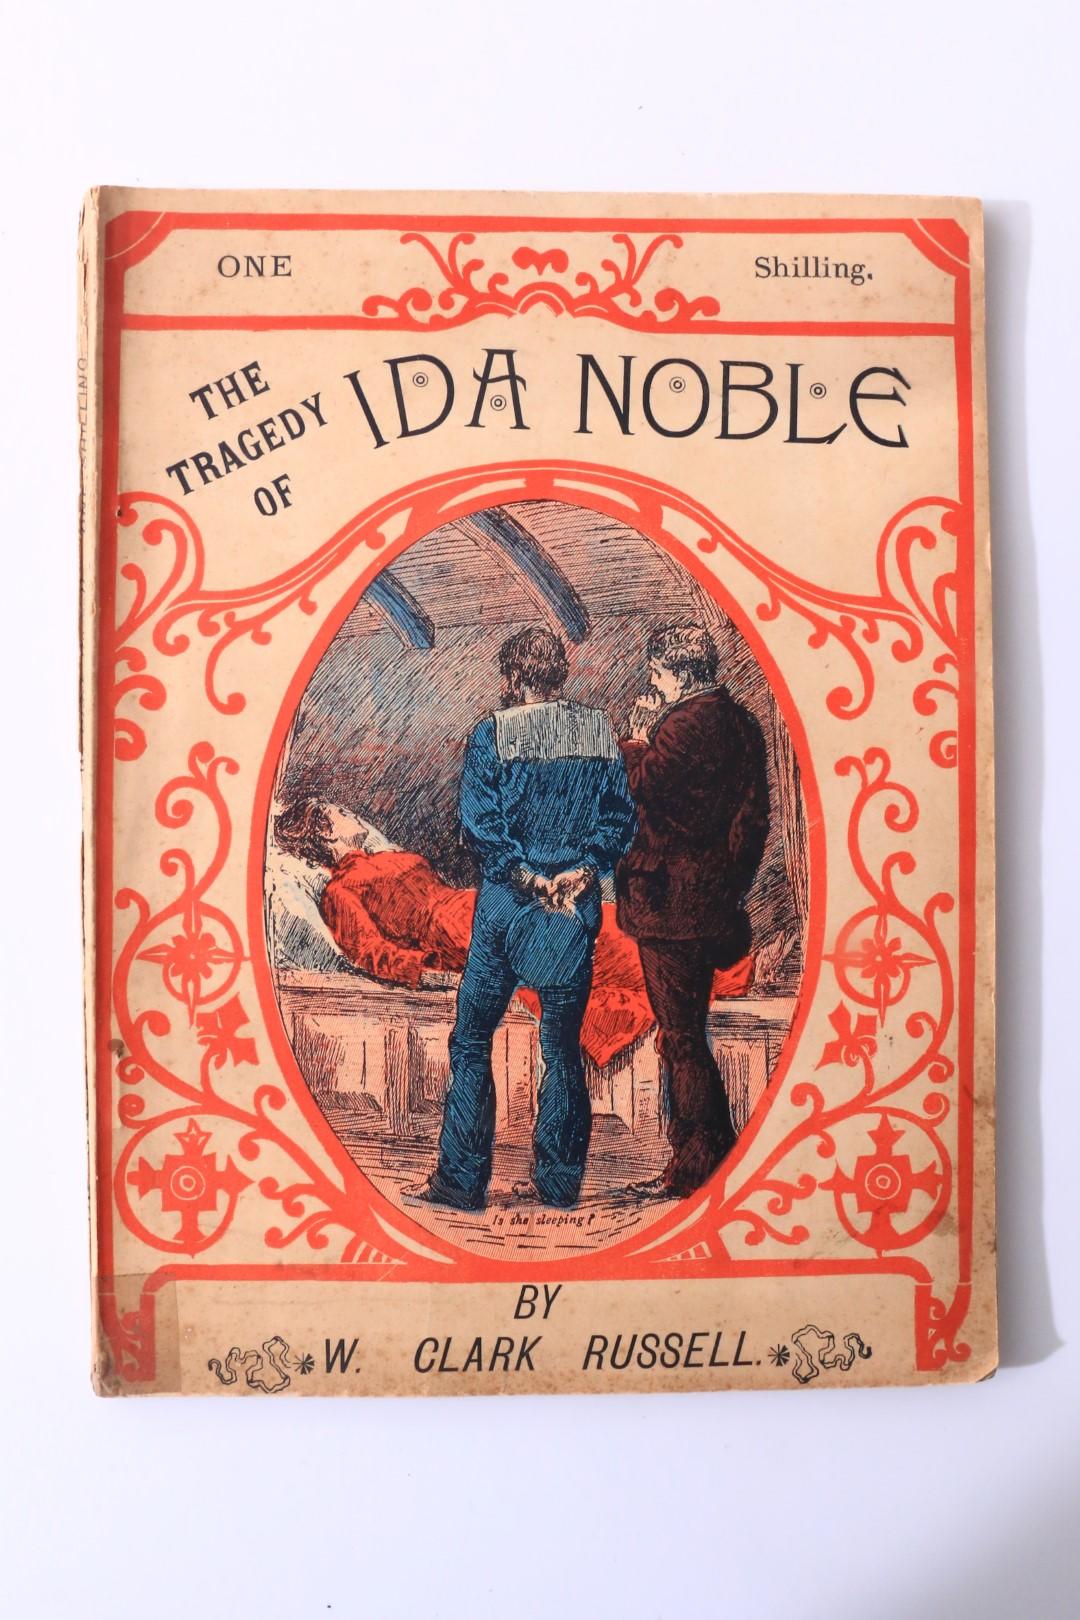 W. Clark Russell - The Tragedy of Ida Noble [Published in the Extra Christmas Number of The Atalanta] - Trischler & Co., 1891, First Edition.